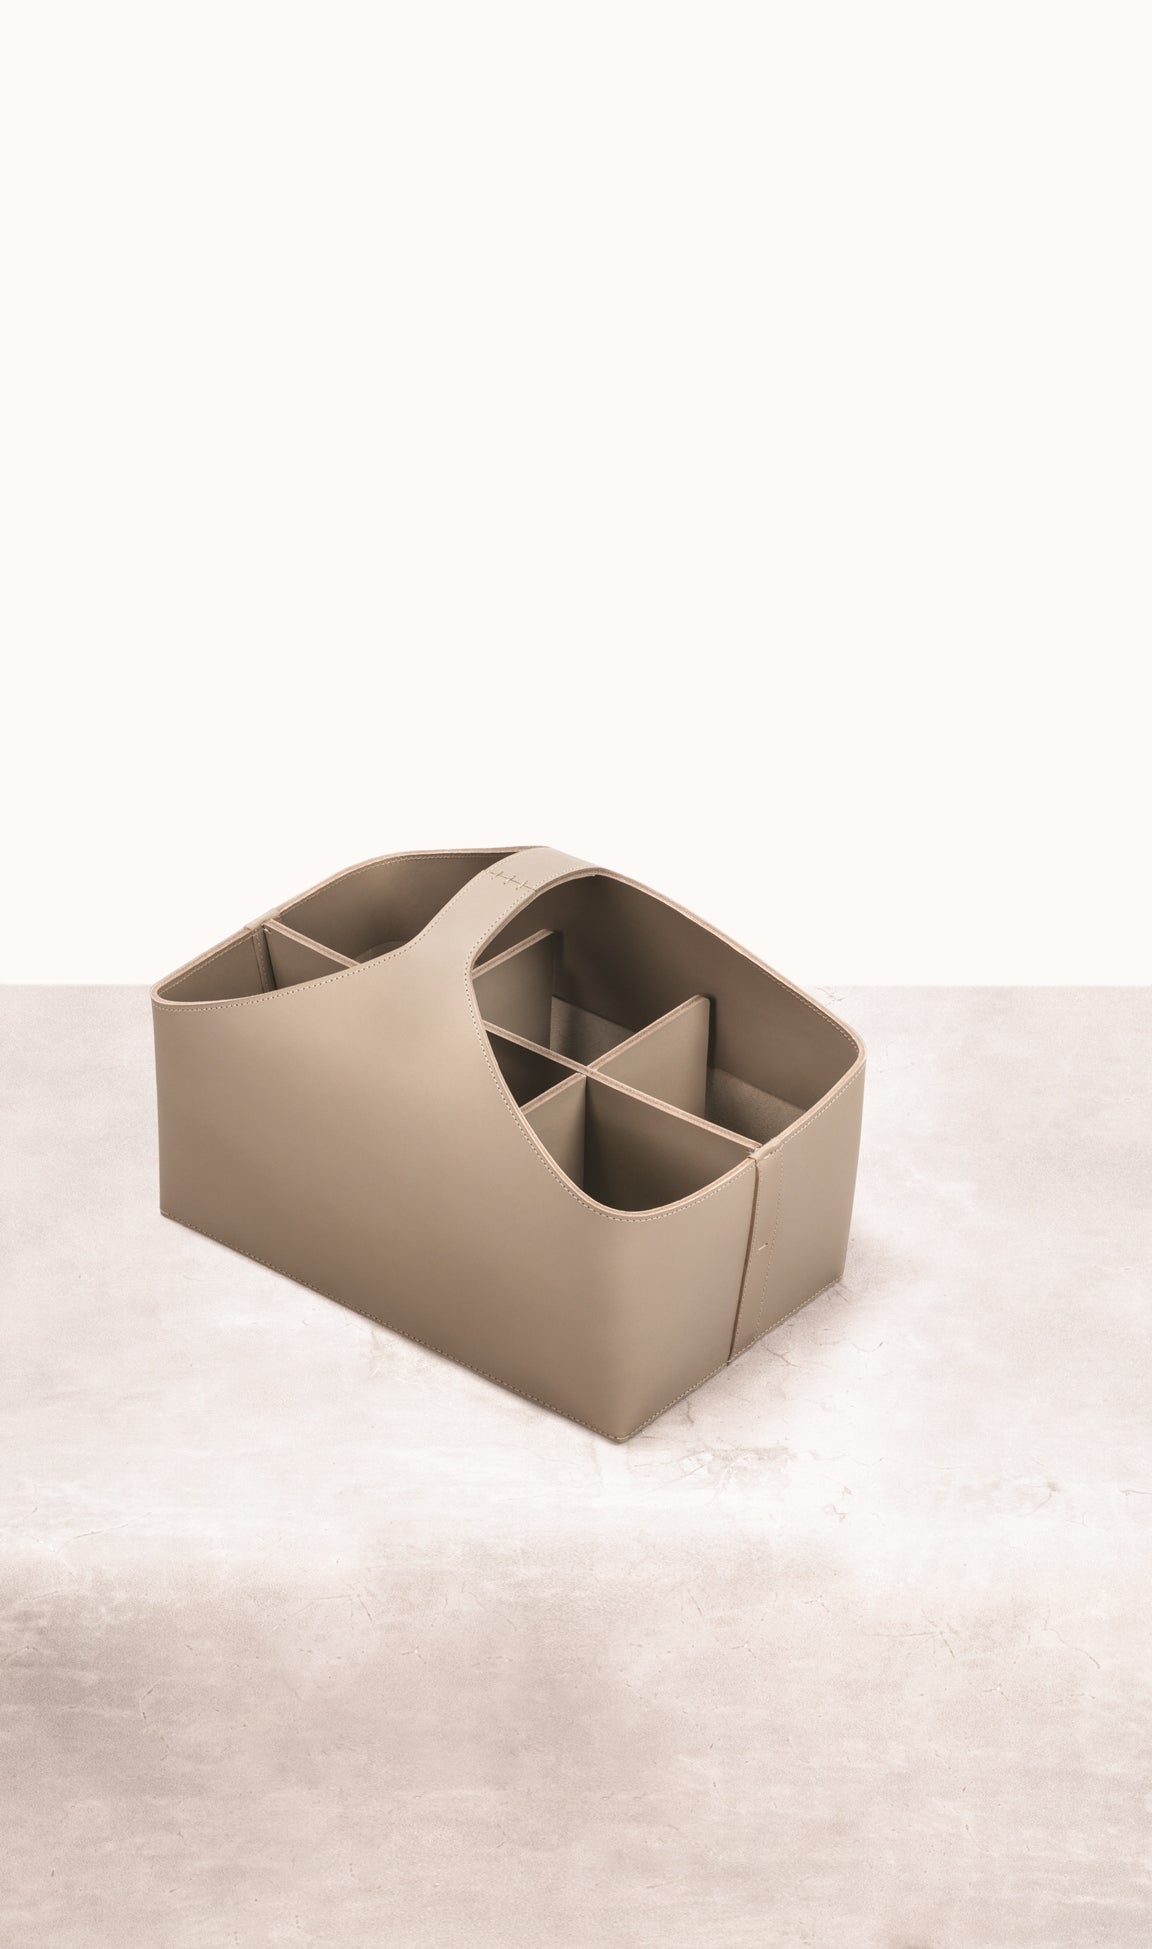 Rabitti 1969 Arco Saddle Leather Storage Basket With Dividers and Handle | Elegant and Functional Storage Solution | Crafted with High-Quality Saddle Leather | Dividers for Enhanced Organization | Handle for Convenient Use | Explore a Range of Luxury Home Accessories at 2Jour Concierge, #1 luxury high-end gift & lifestyle shop